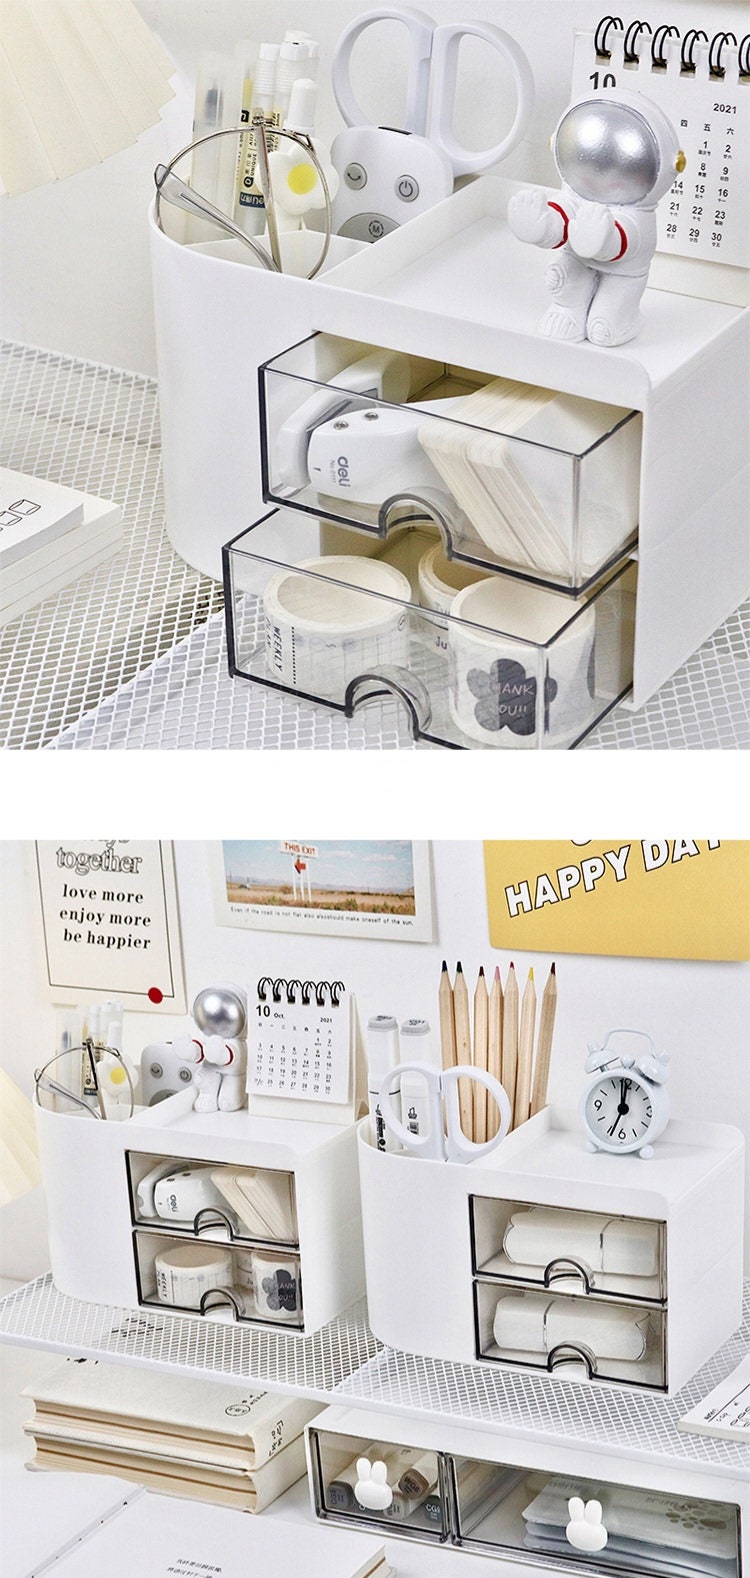 Compact Desk Organiser With Built-in Drawers 3 Colours 